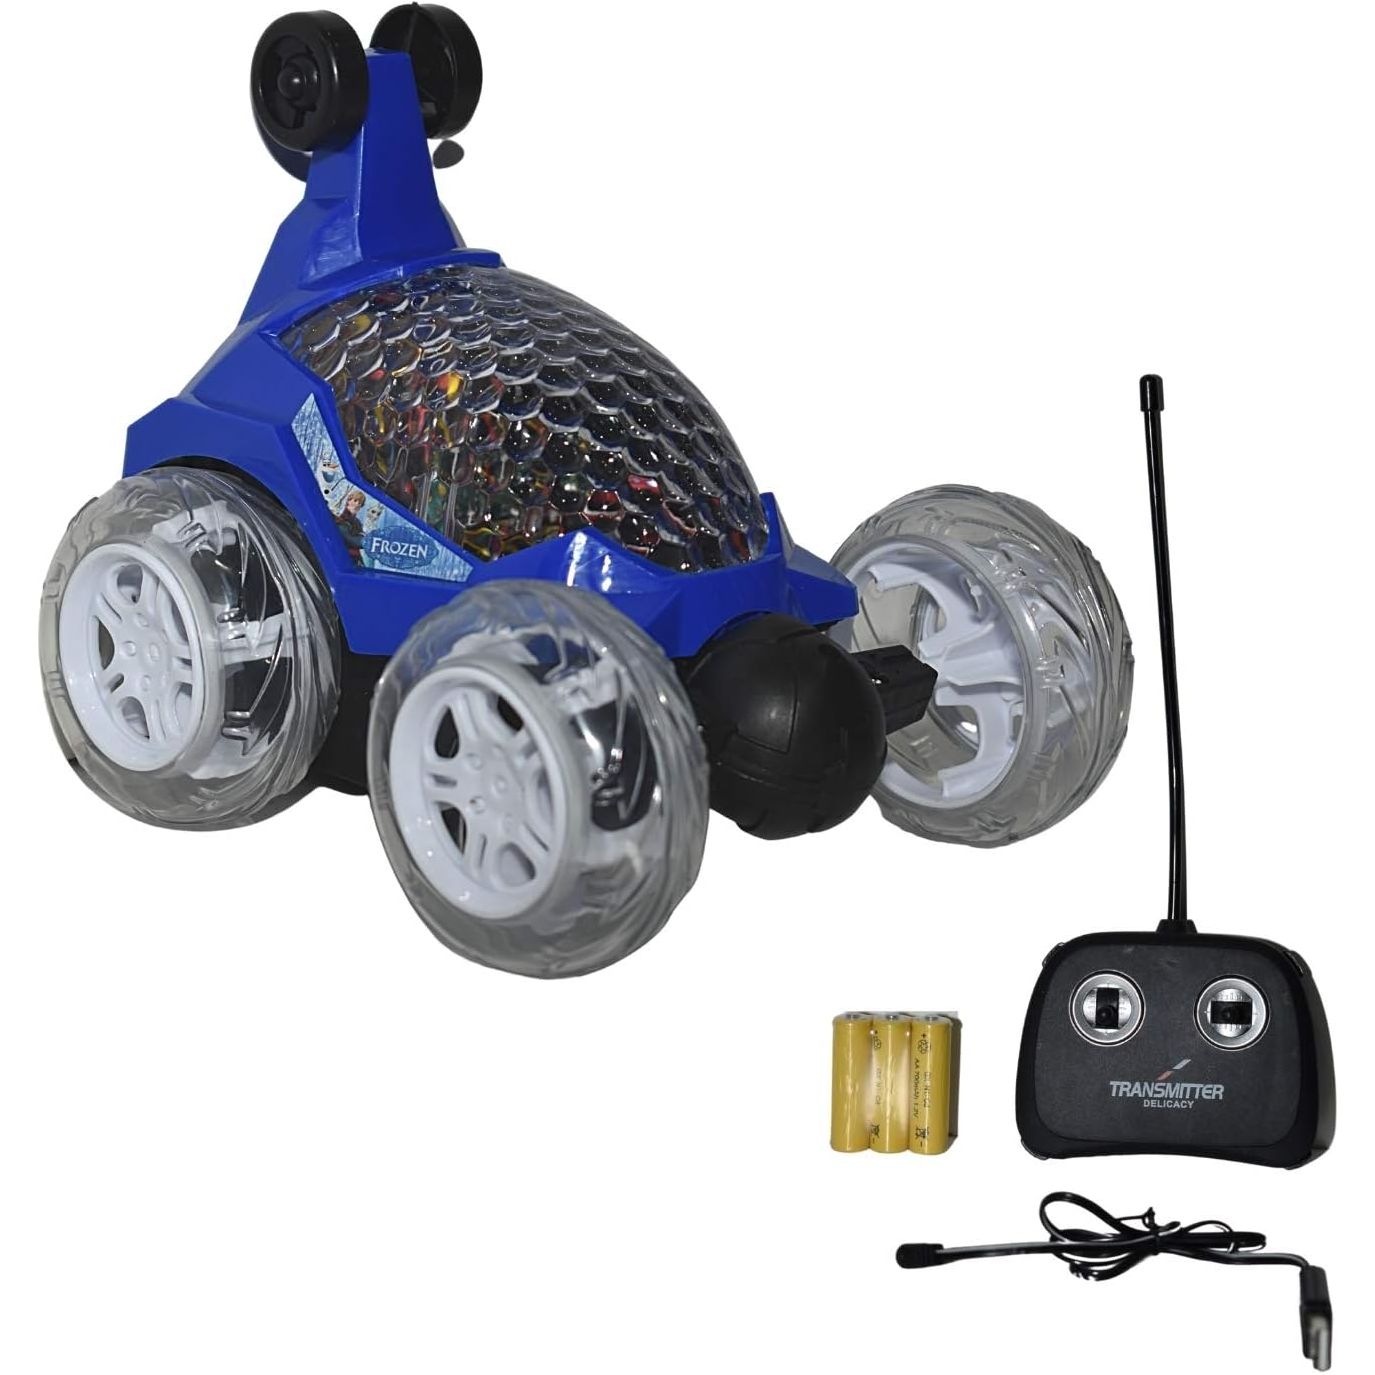 Frozen 360° Rotating Acrobatic Car with Light, Music and Remote Control